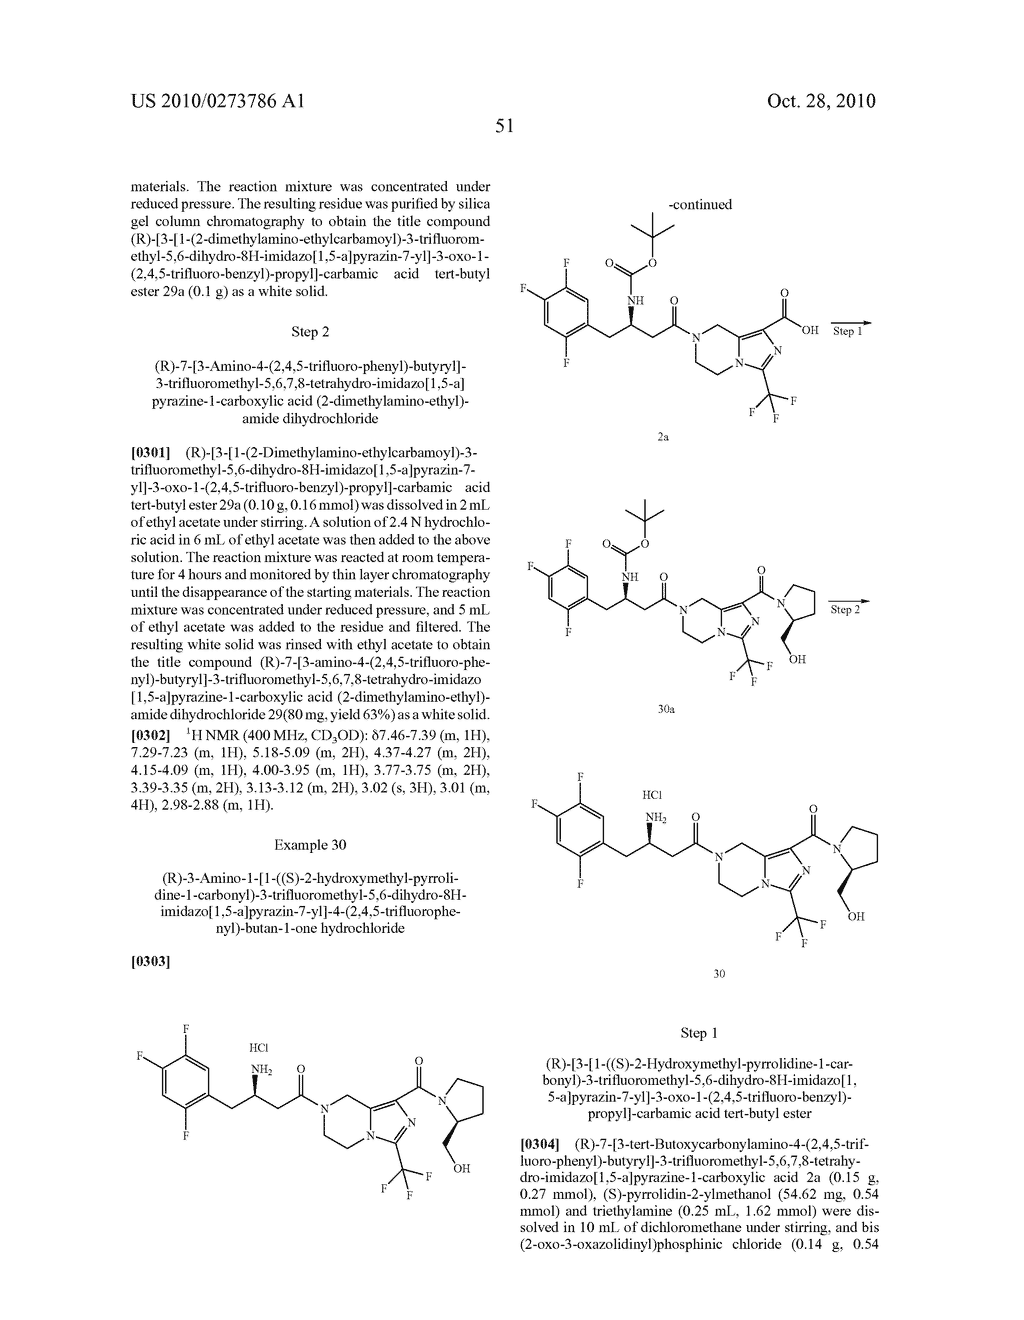 TETRAHYDRO-IMIDAZ0[1,5-A]PYRAZINE DERIVATIVES, PREPARATION PROCESS AND MEDICINAL USE THEREOF - diagram, schematic, and image 52